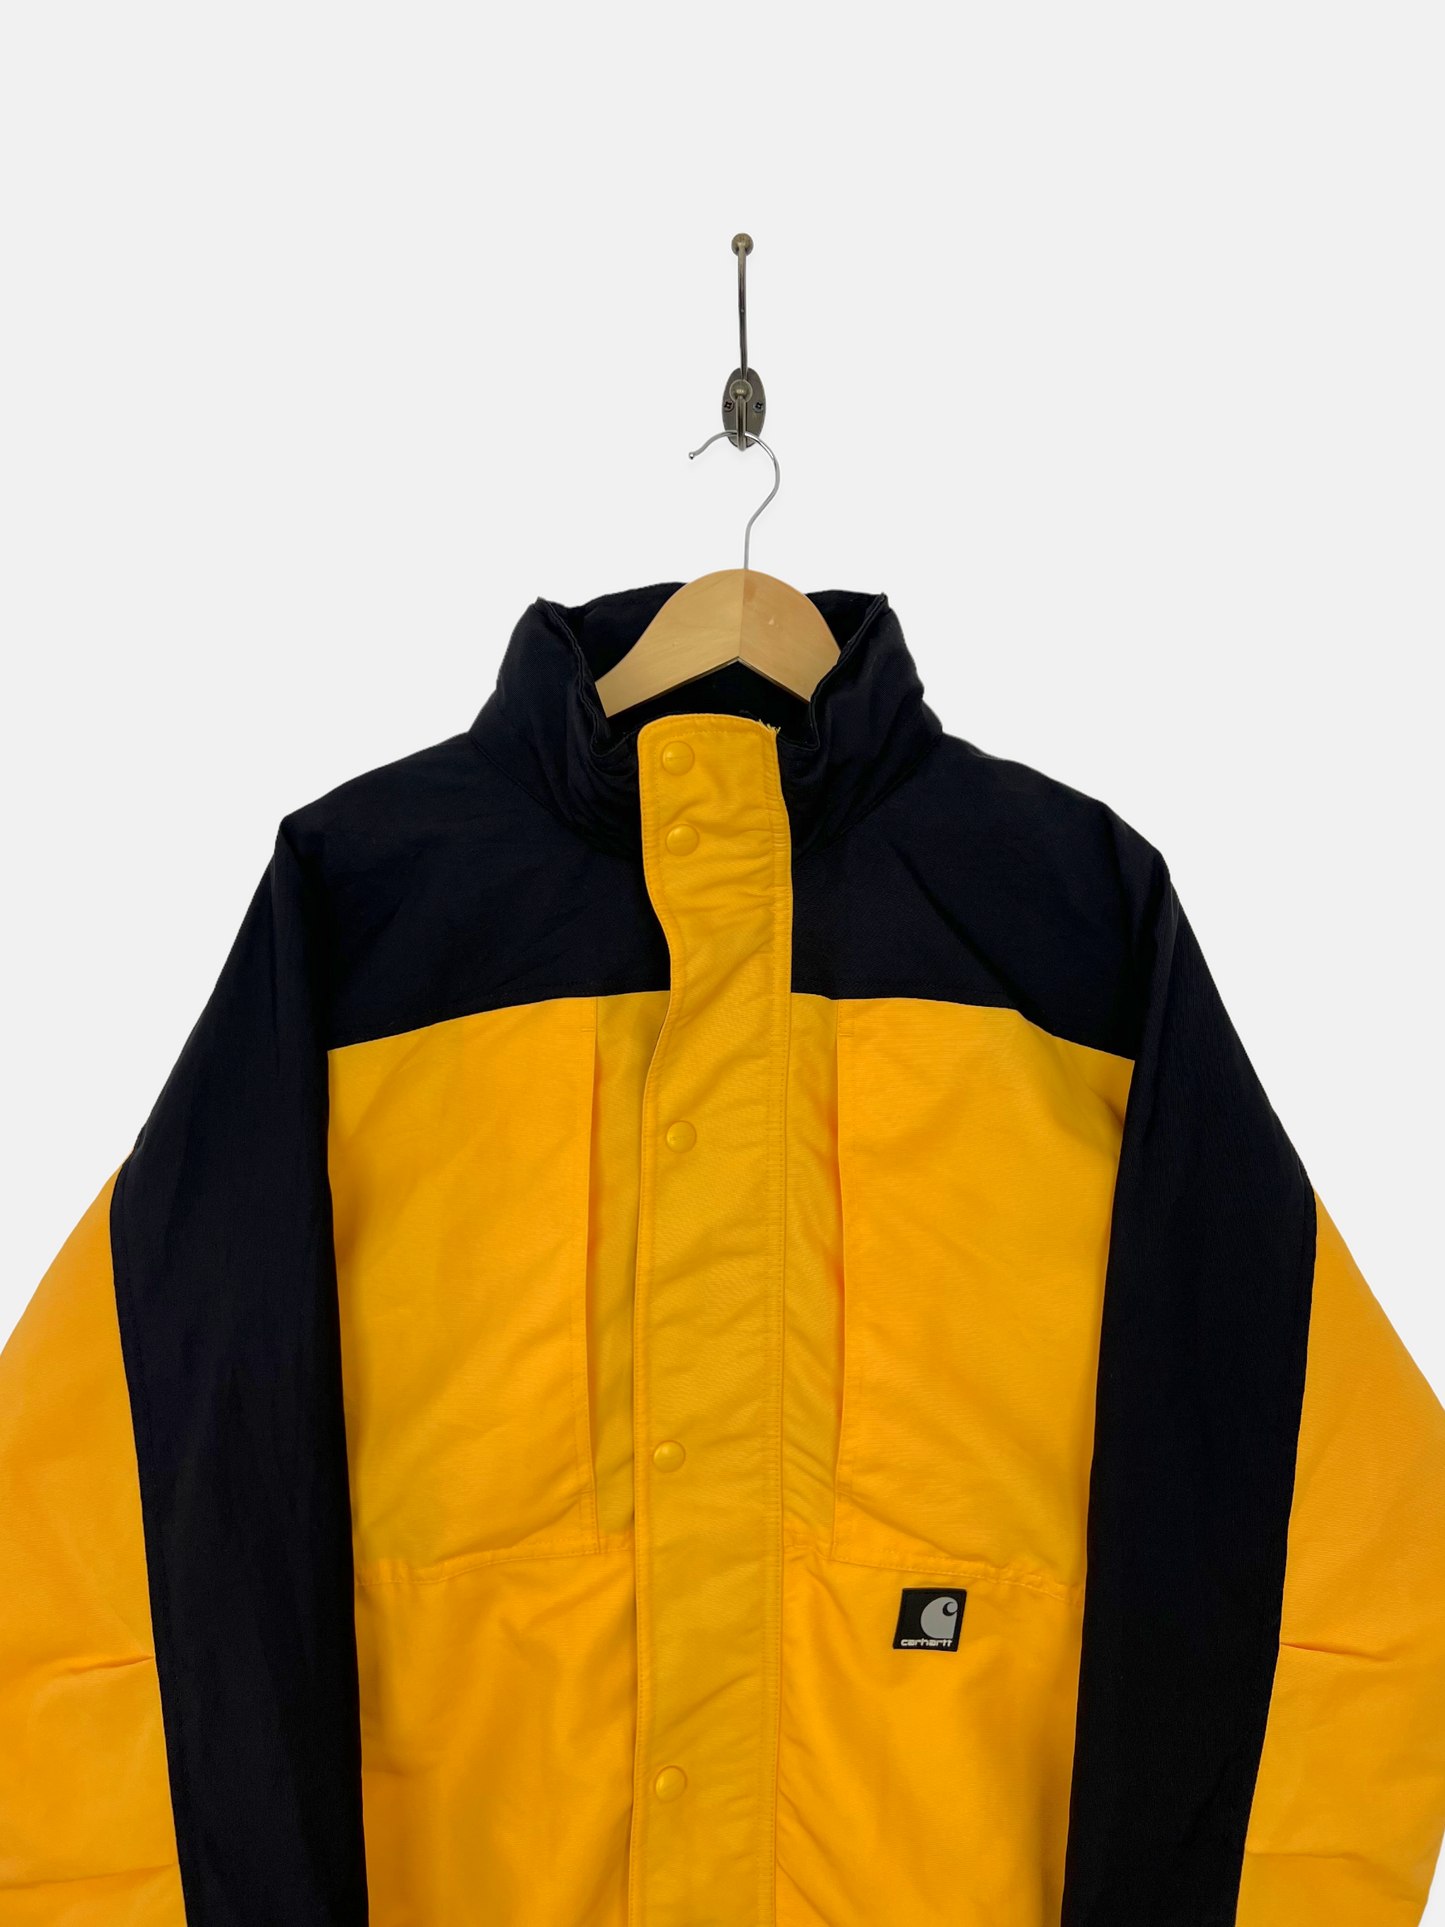 90's Carhartt Vintage Jacket with Hood Size M-L